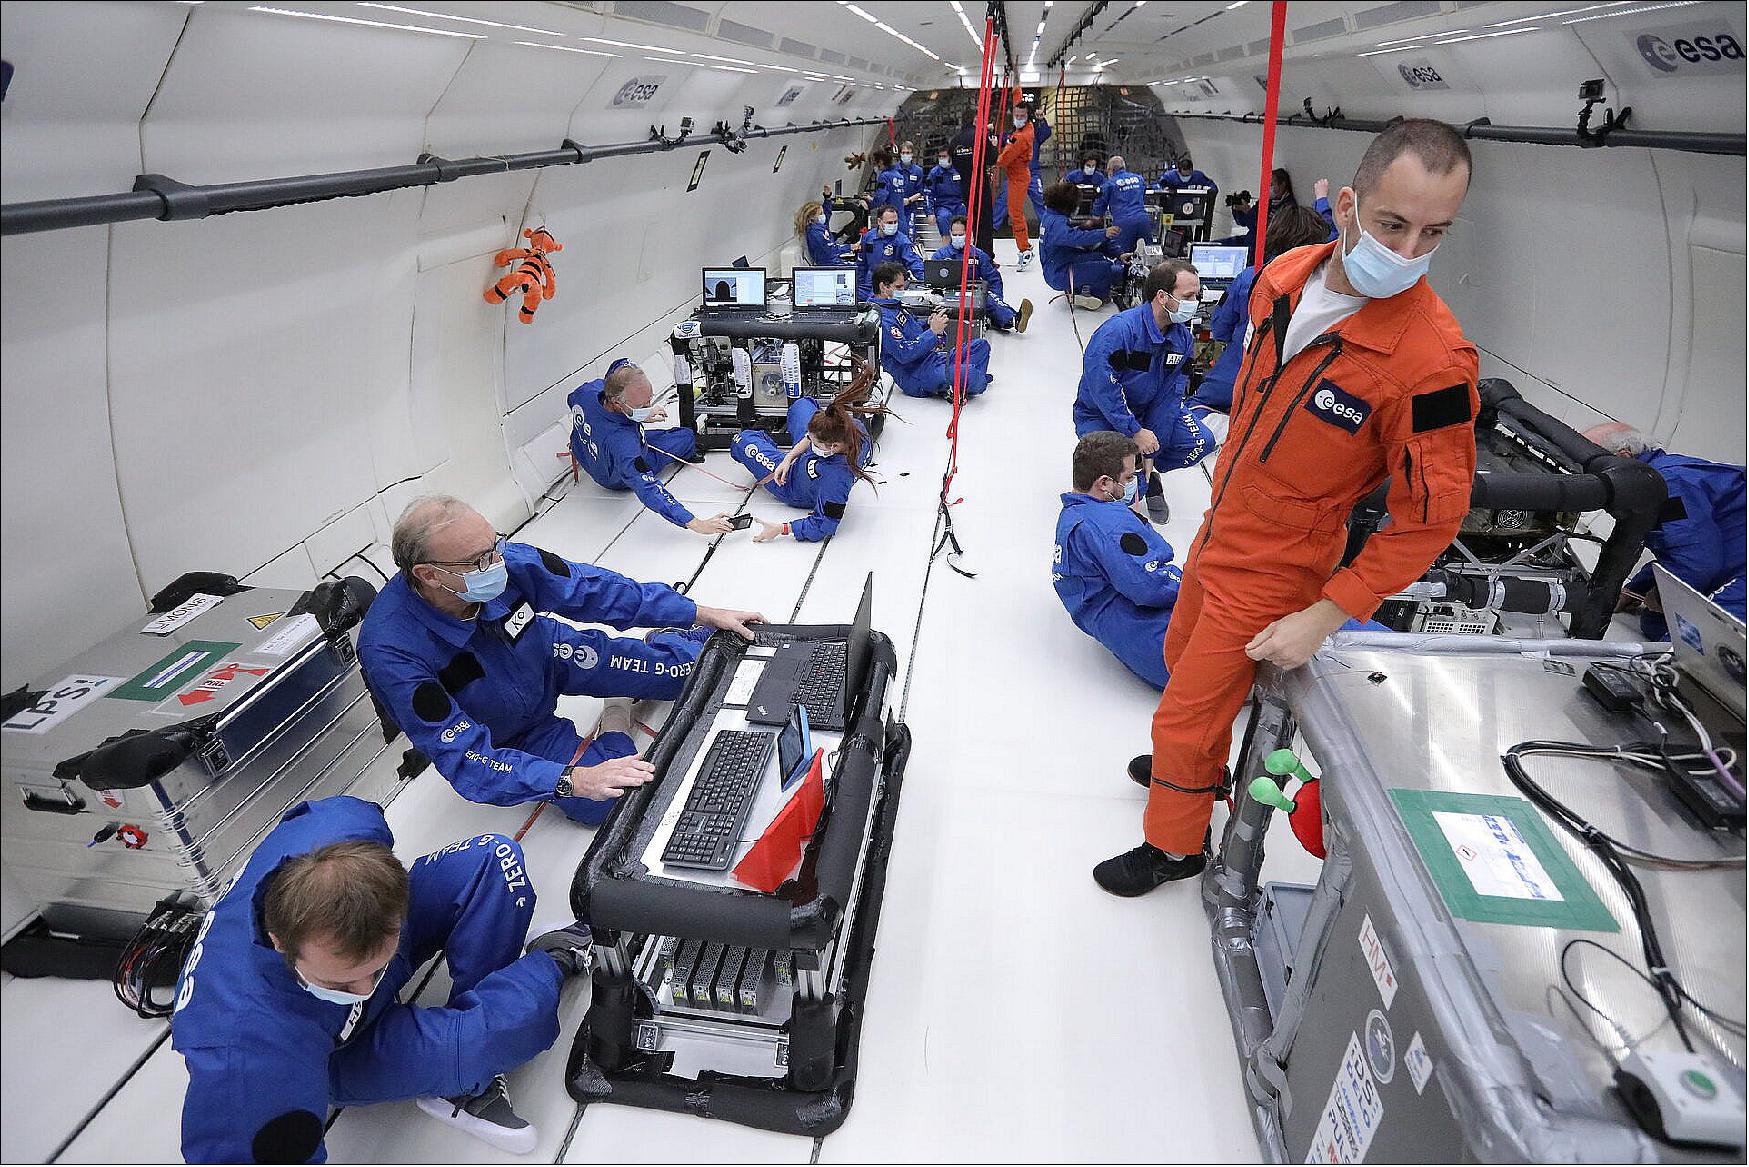 Figure 5: Inside ESA's 73rd parabolic flight. The diverse experiments focused on how humans perceive motion without gravity as reference, how our brains manage to process information during weightlessness, new ways of extracting oxygen from lunar soil, techniques for better cooling and heat transfer in space, and zero-g 3D-printing (image credit: Novespace)